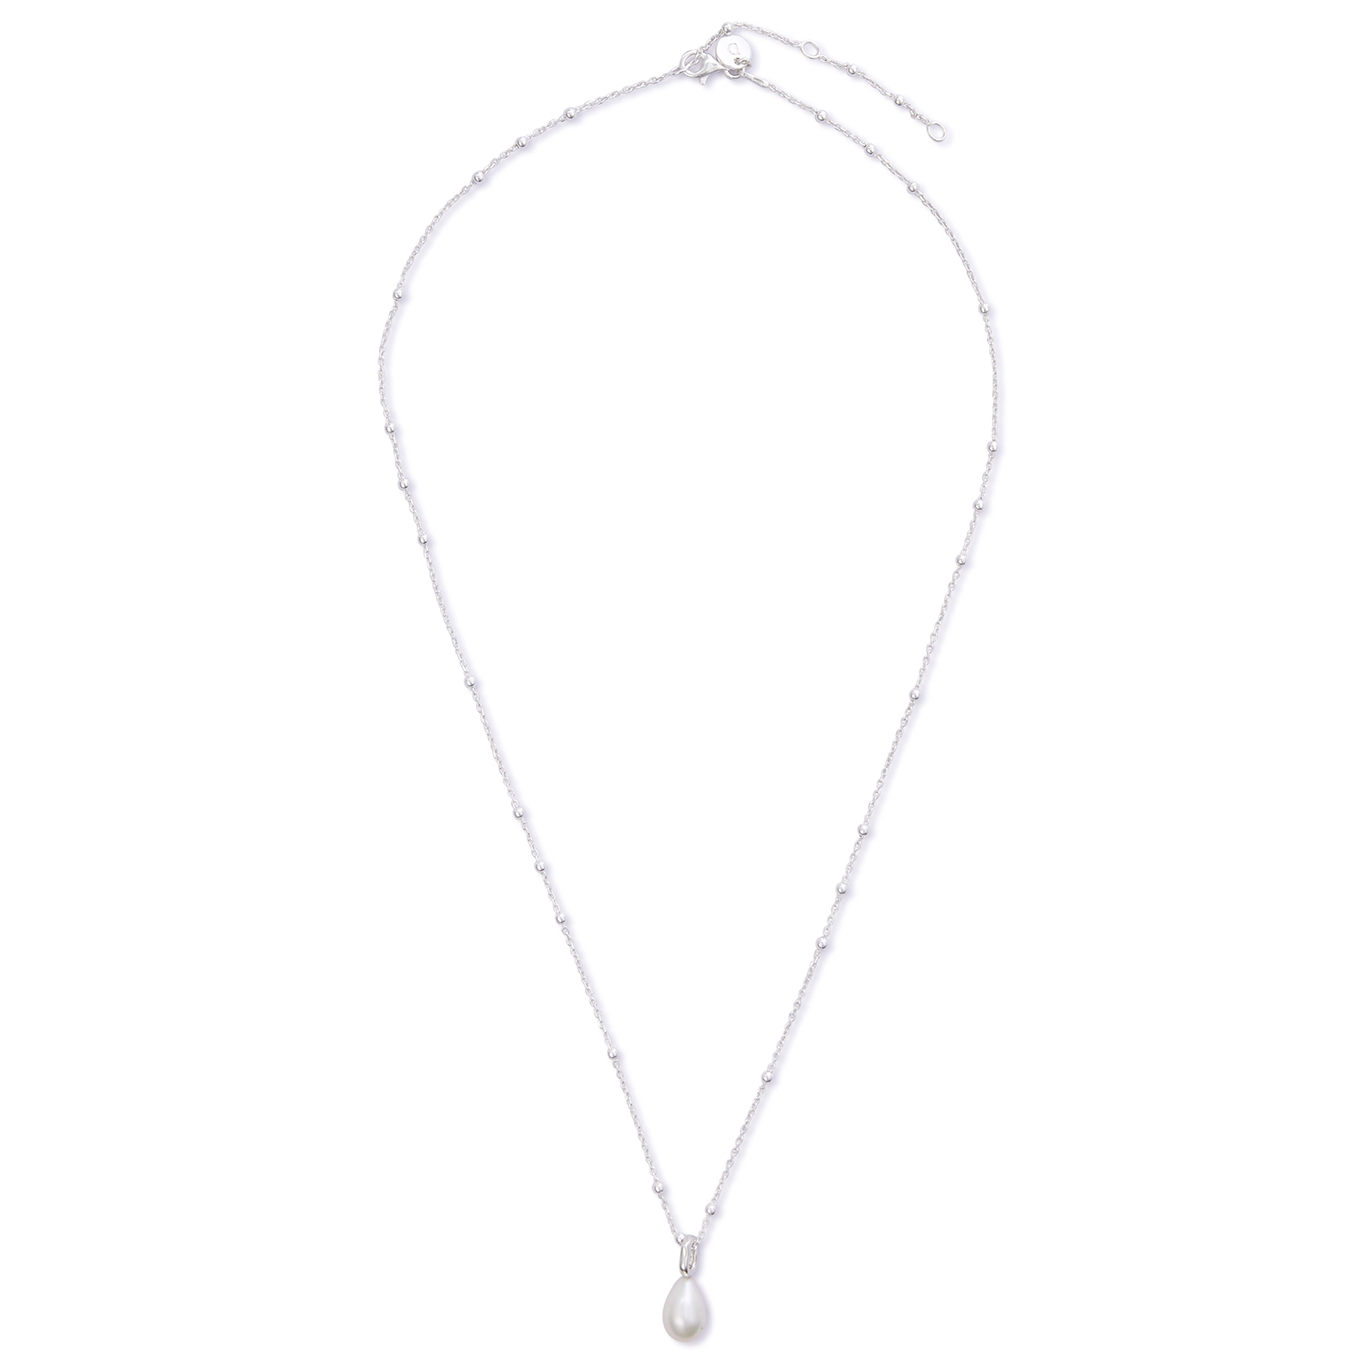 Daisy London Treasures Sterling Silver Necklace